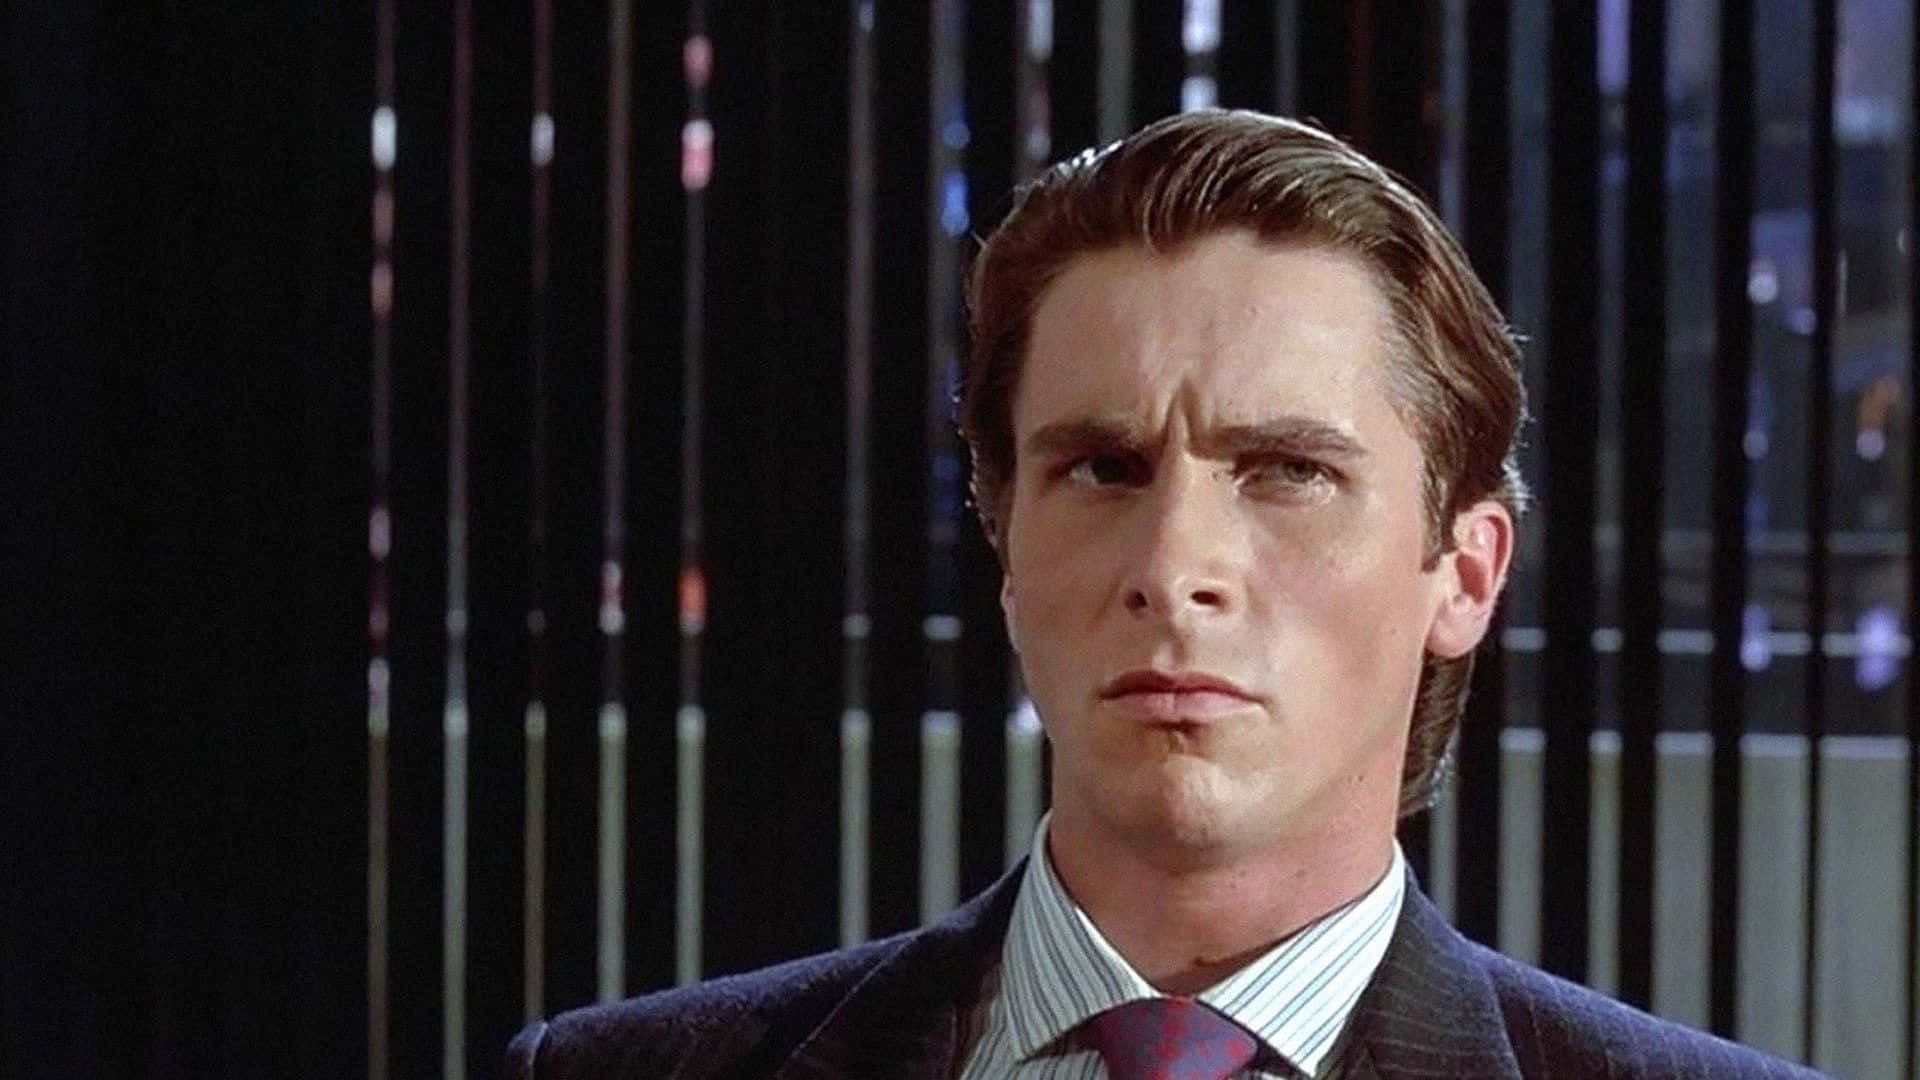 Patrick Bateman, portrayed by Christian Bale in the cult classic movie "American Psycho" Wallpaper